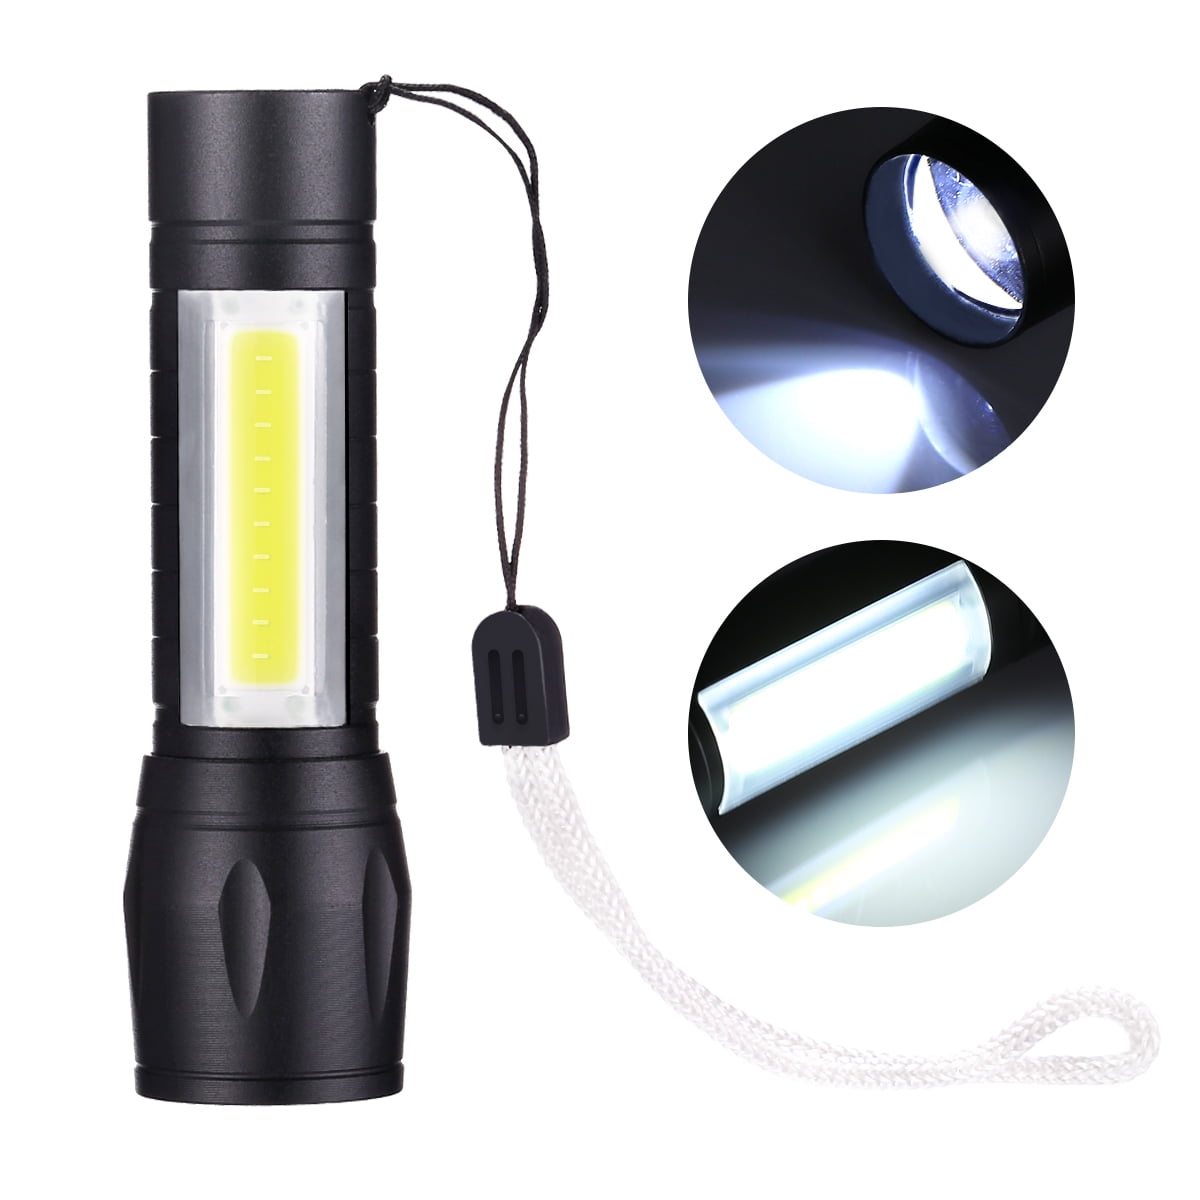 Emergency Kit Star Eleven LED Work Light,Rechargeable COB LED Inspection Lamp Hand Torch Work Light USB Charging Magnetic Flashlight Torch with Hook,for Auto Camping